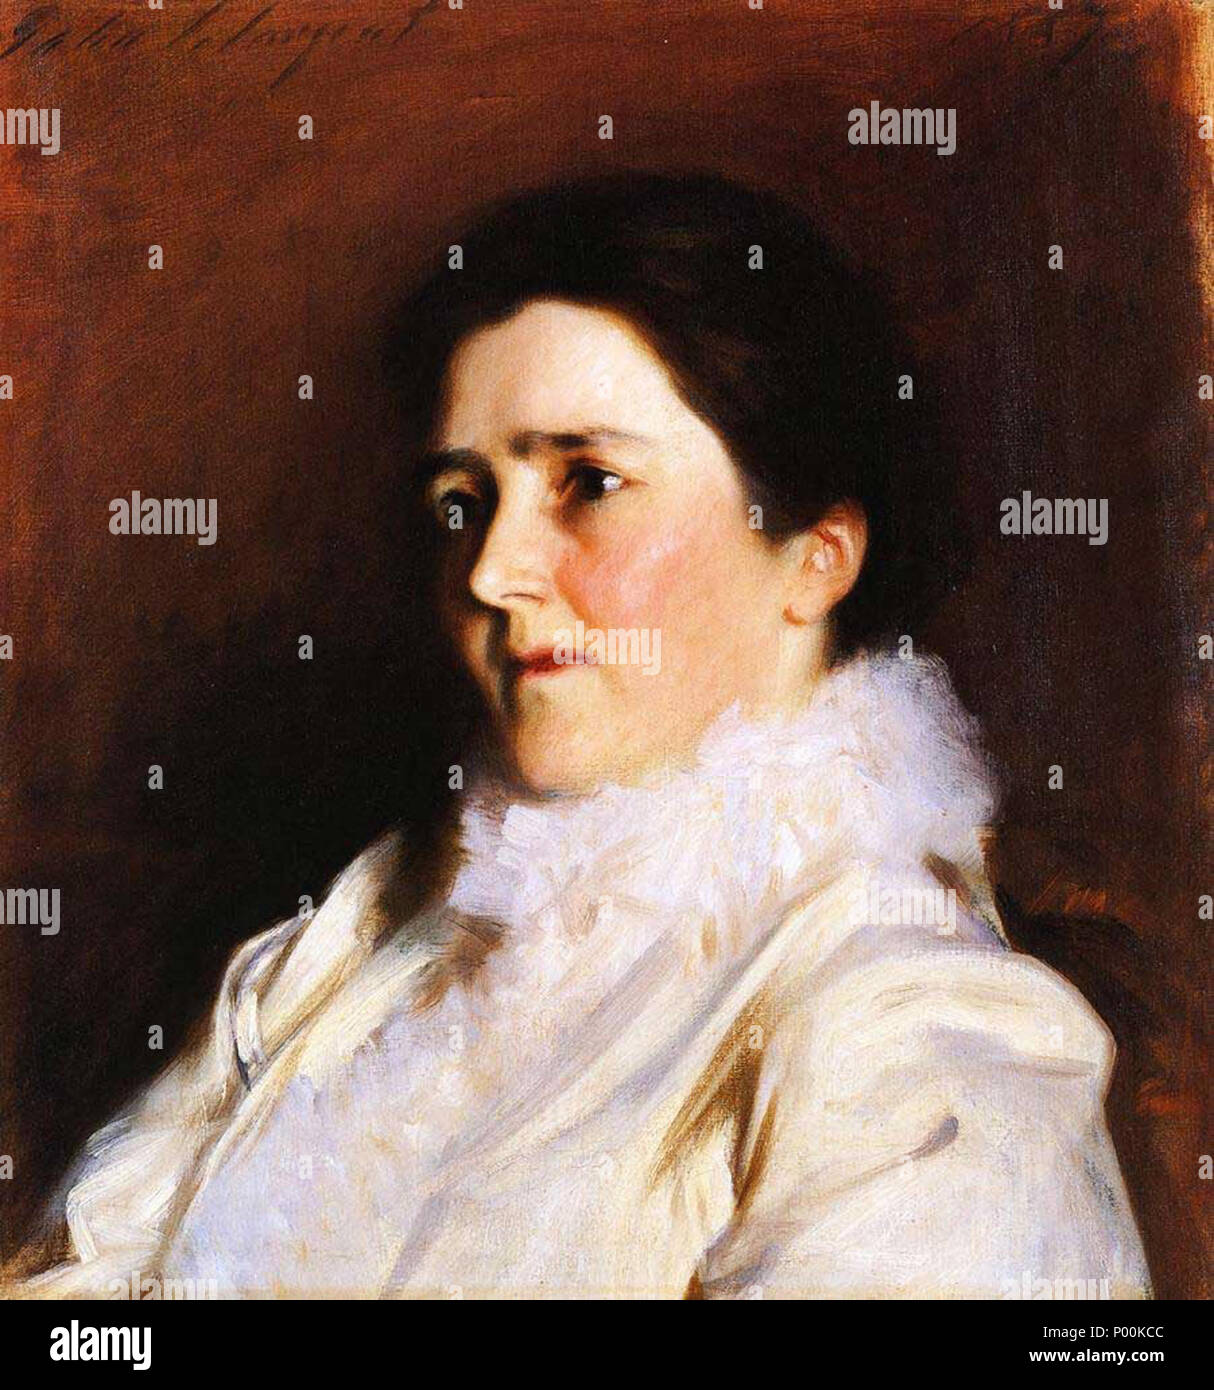 . English: Portrait of Elizabeth Nelson Fairchild John Singer Sargent -- American painter 1887 Brunswick College Museum of Art, ME Oil on canvas 49.69 x 46.36 cm (19 9/16 x 18 1/4 in.) Museum Purchase, George Otis Hamlin Fund and Friends of the College Fund assession # 1985.40 Jpg: the-athenaeum  . 1887. John Singer Sargent (January 12, 1856 – April 14, 1925) 85 Portrait of Elizabeth Nelson Fairchild Stock Photo